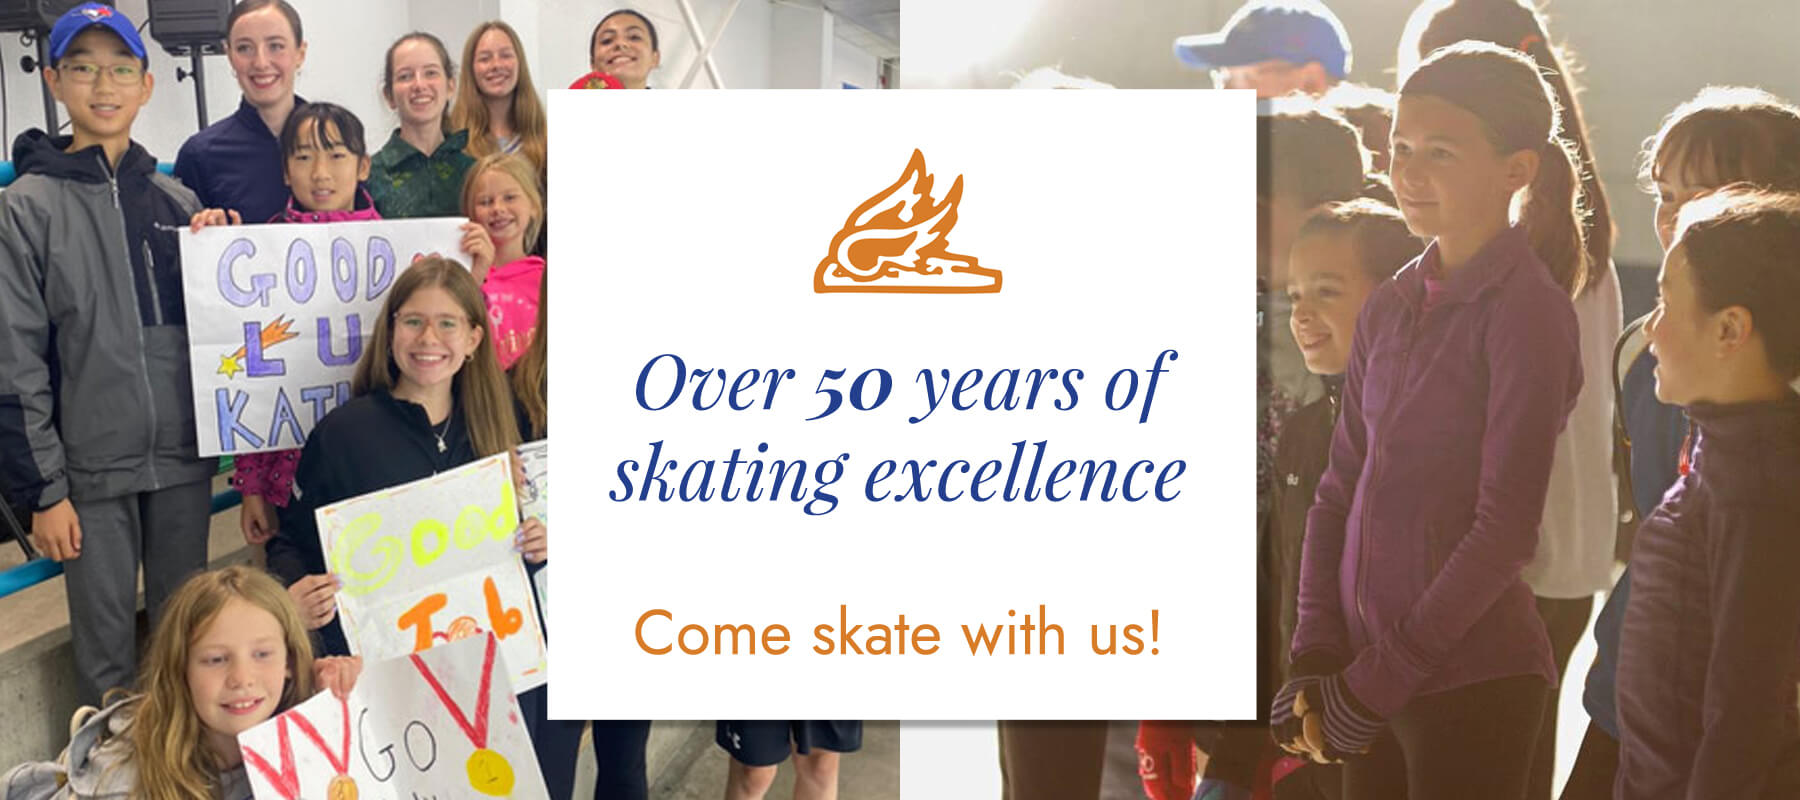 Over 50 years of skating excellence. Come skate with us!